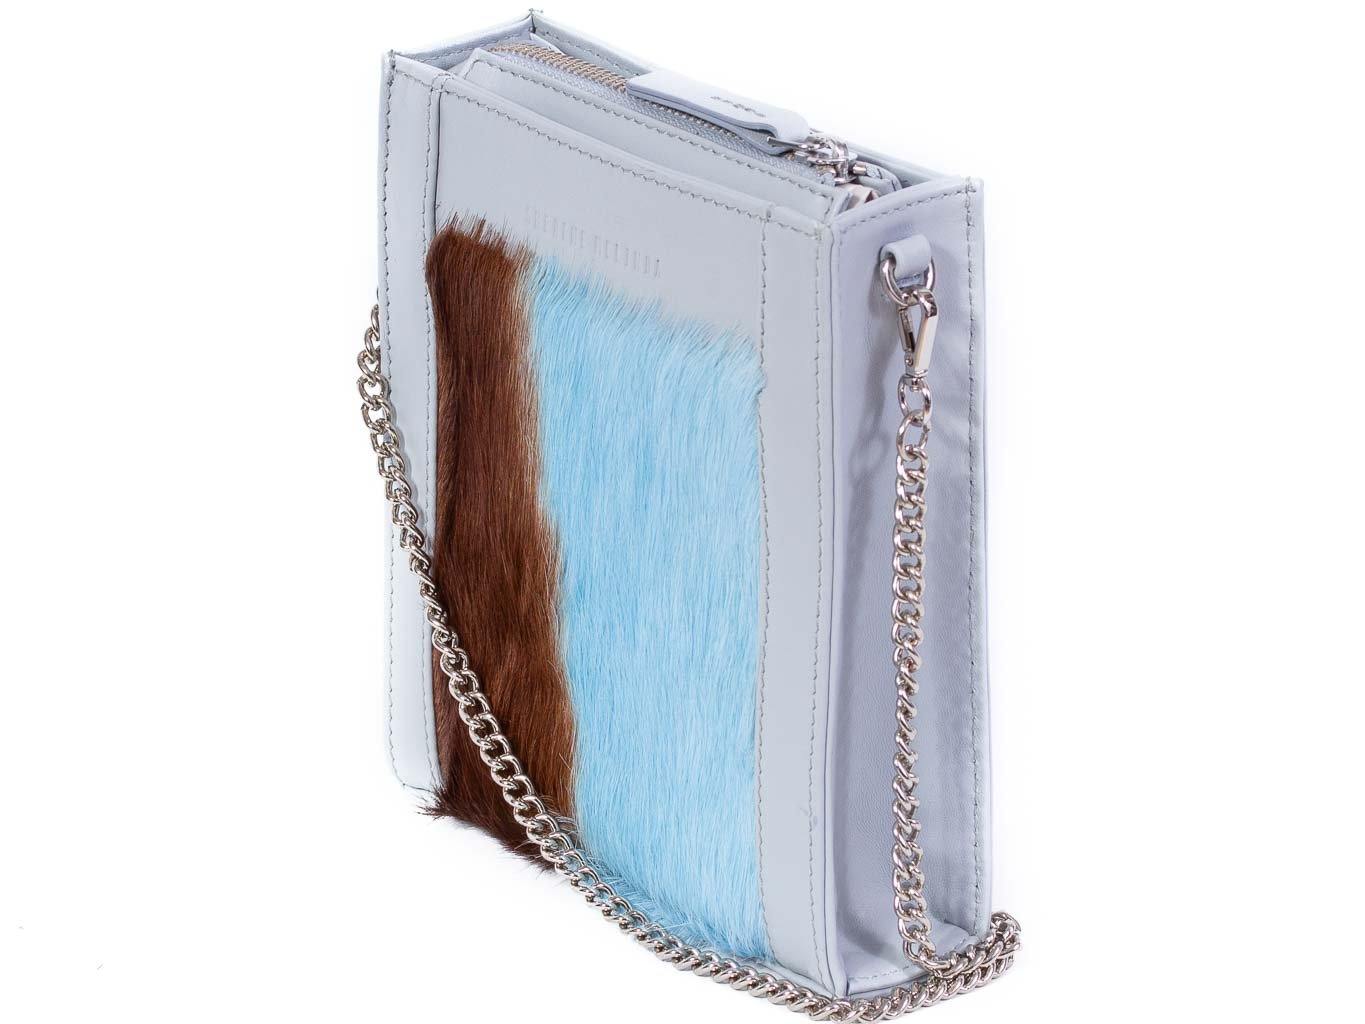 Messenger Springbok Handbag in Baby Blue with a stripe feature by Sherene Melinda side angle